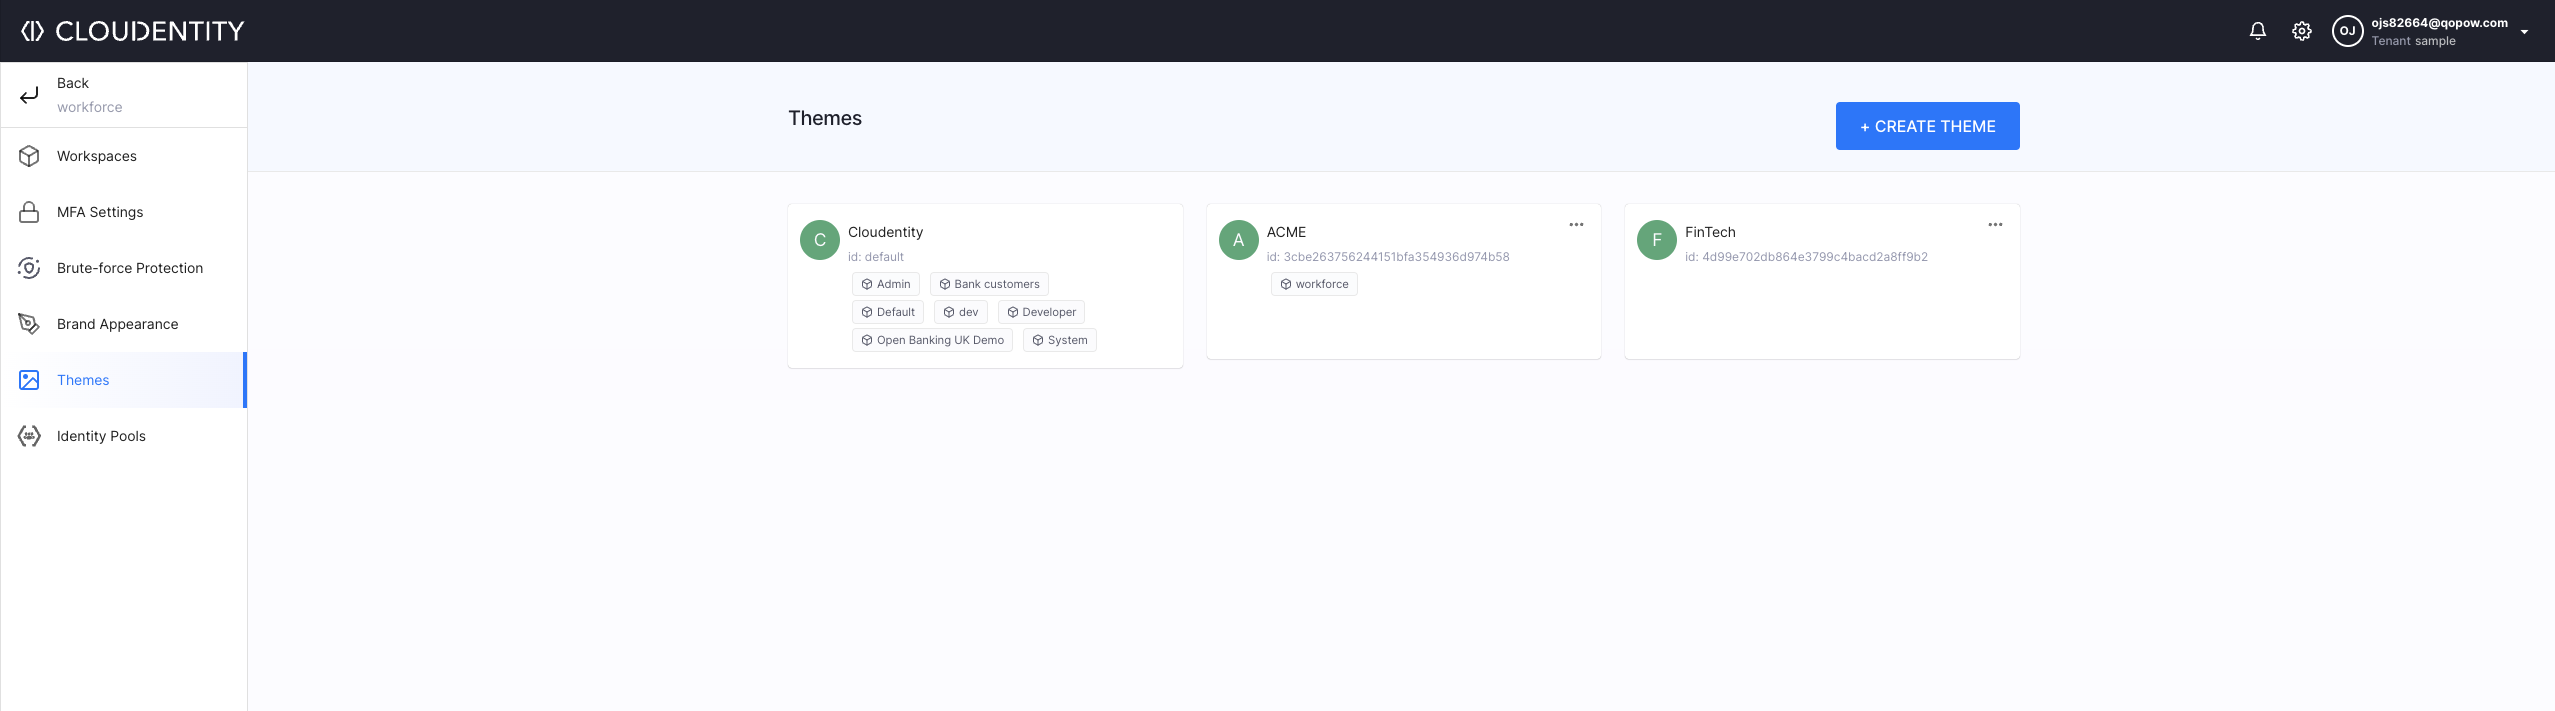 Themes view in Cloudentity platform